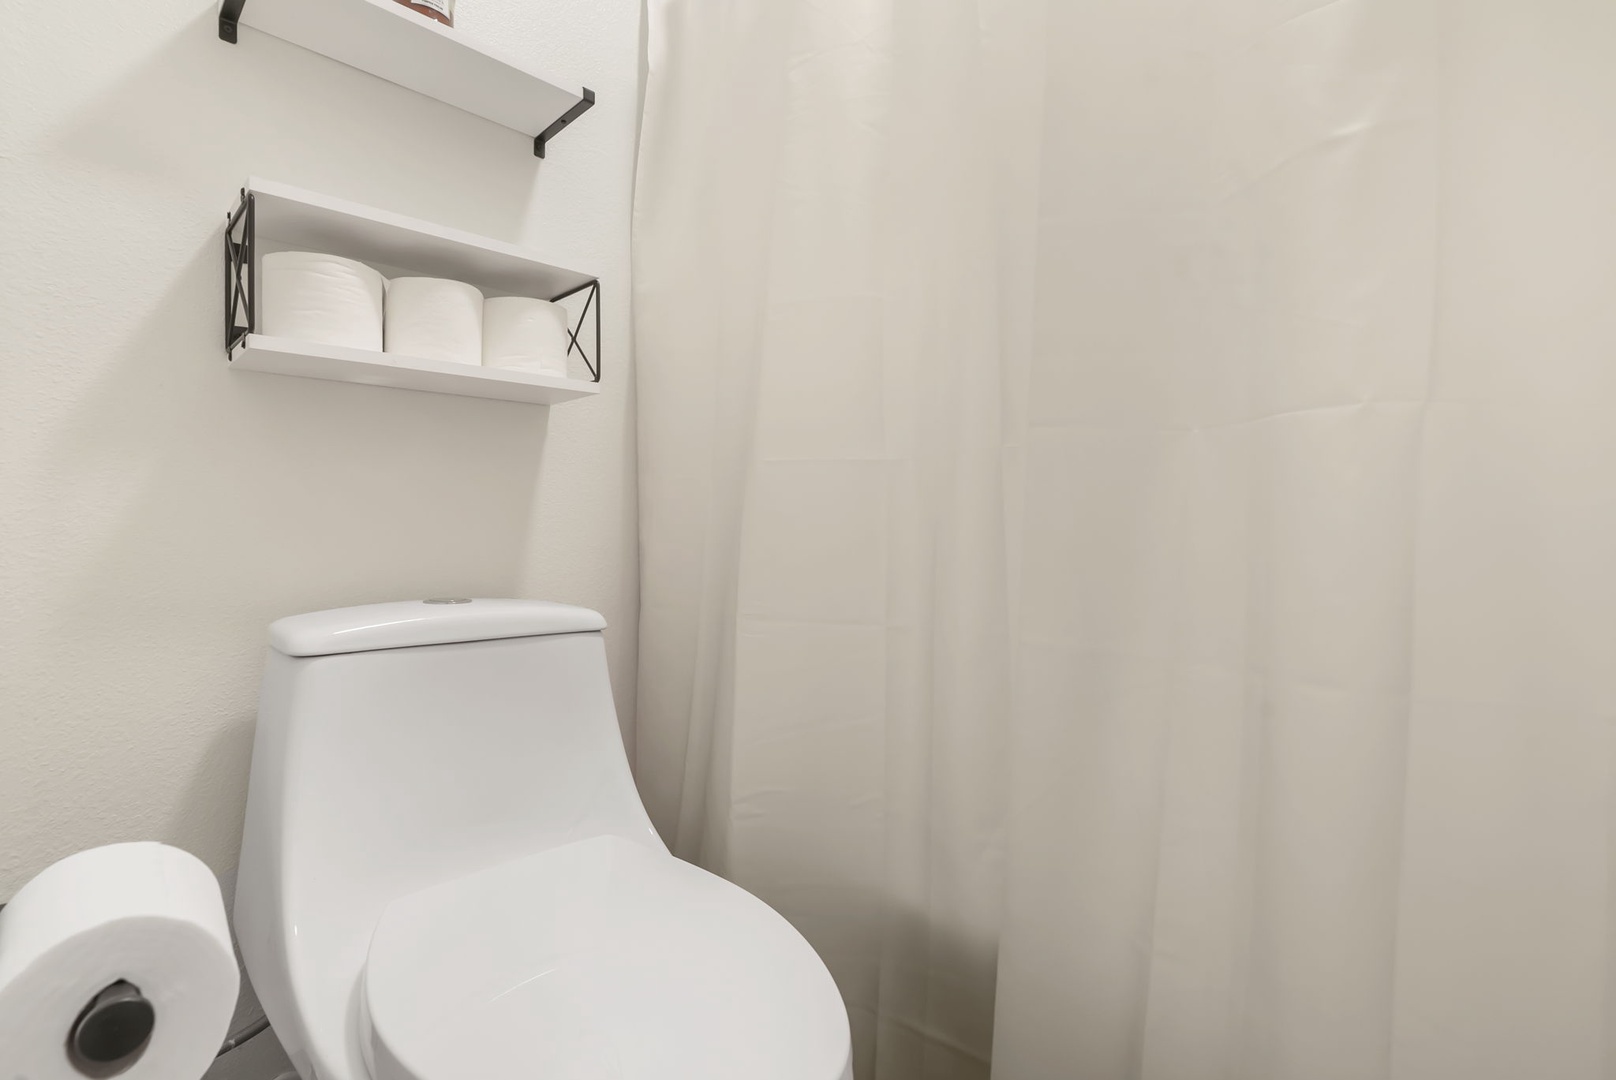 Enjoy ample storage space and beautiful finishes in the Bathroom, offering a Shower/Tub Combo